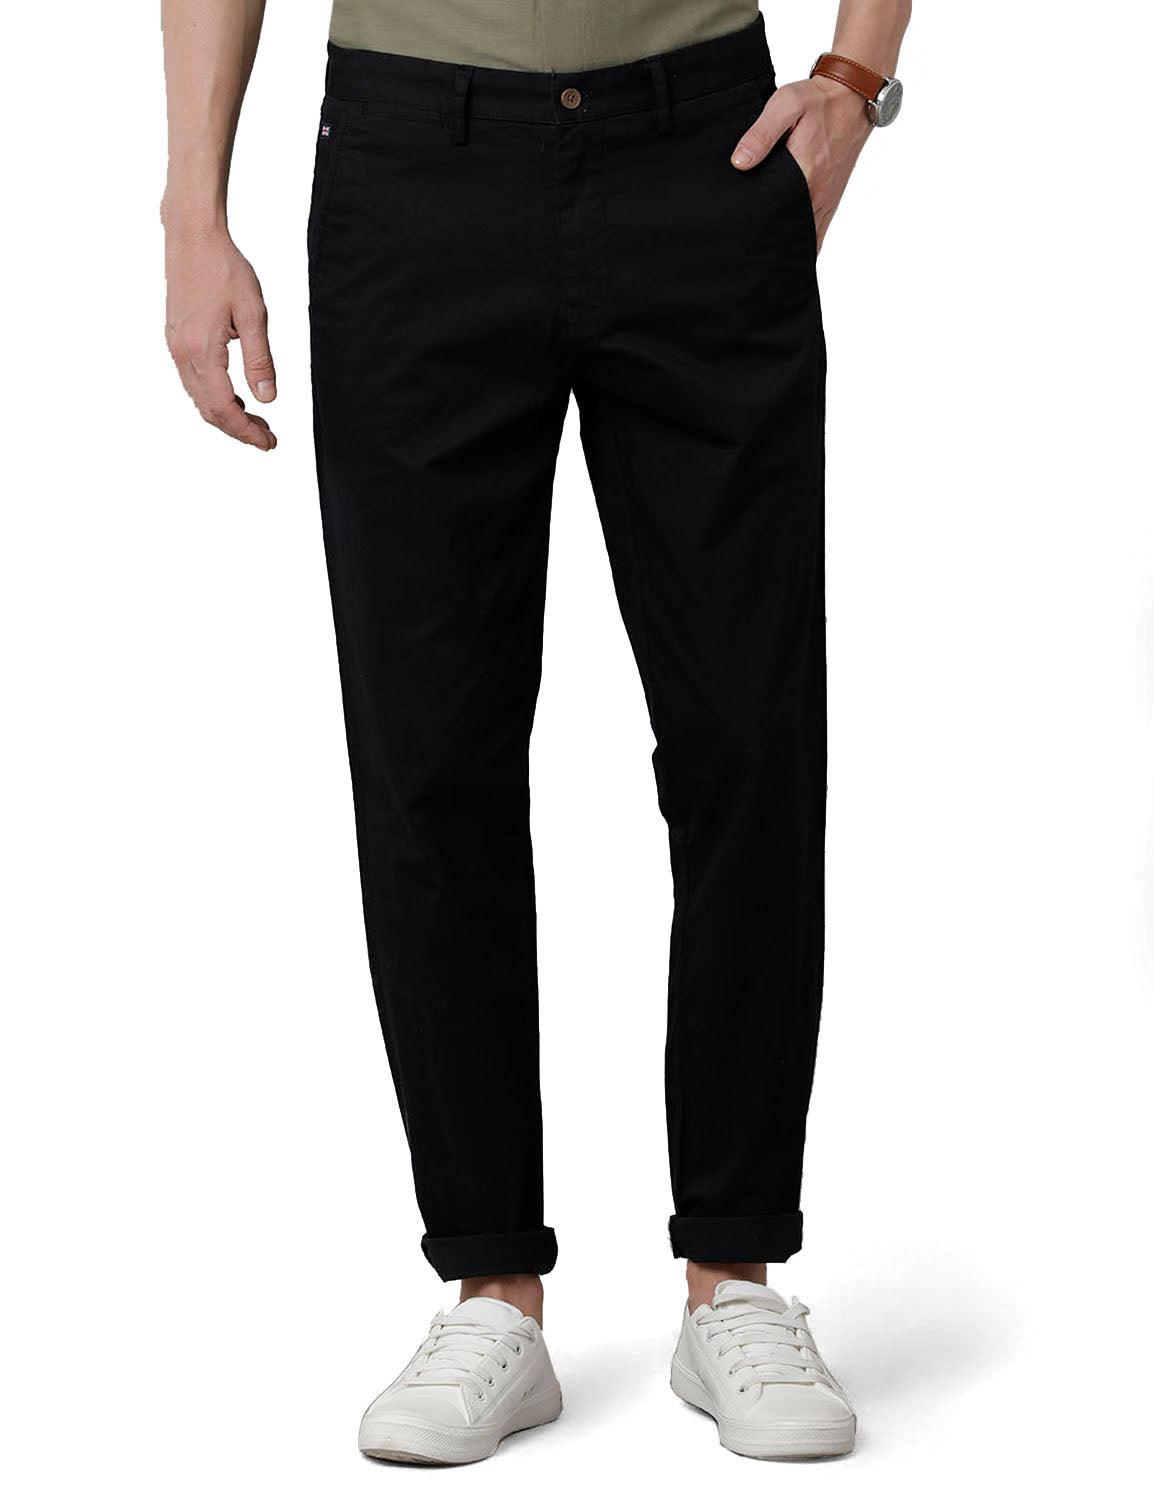 Black Solid Slim Fit Trouser - Double Two